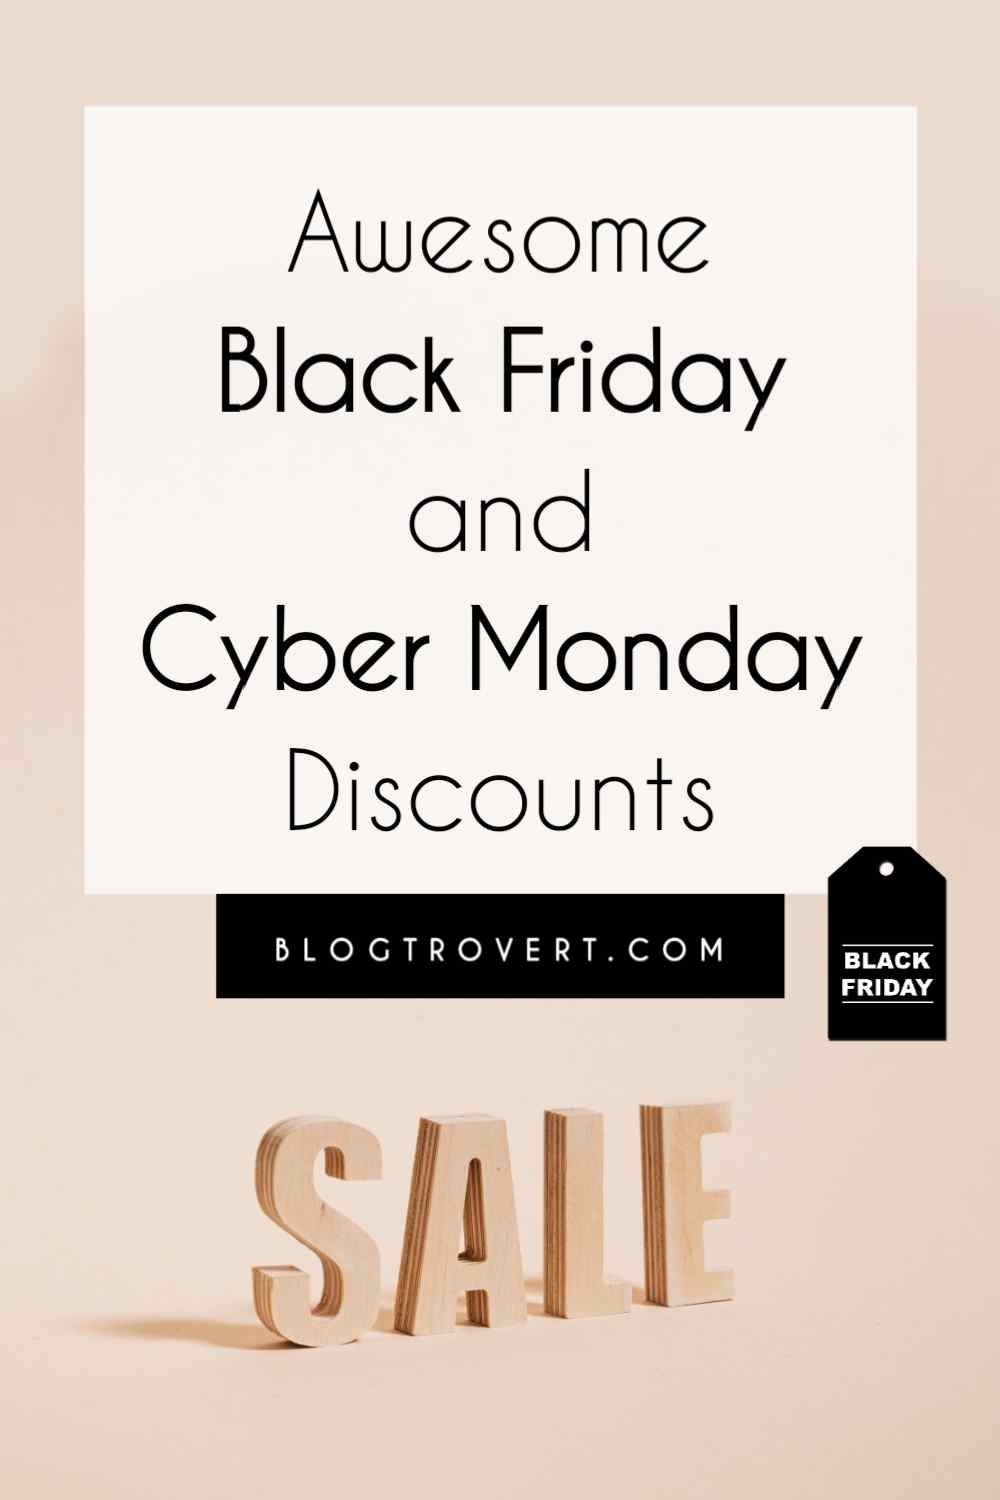 Awesome Black Friday and Cyber Monday Deals For Bloggers and Creatives 3